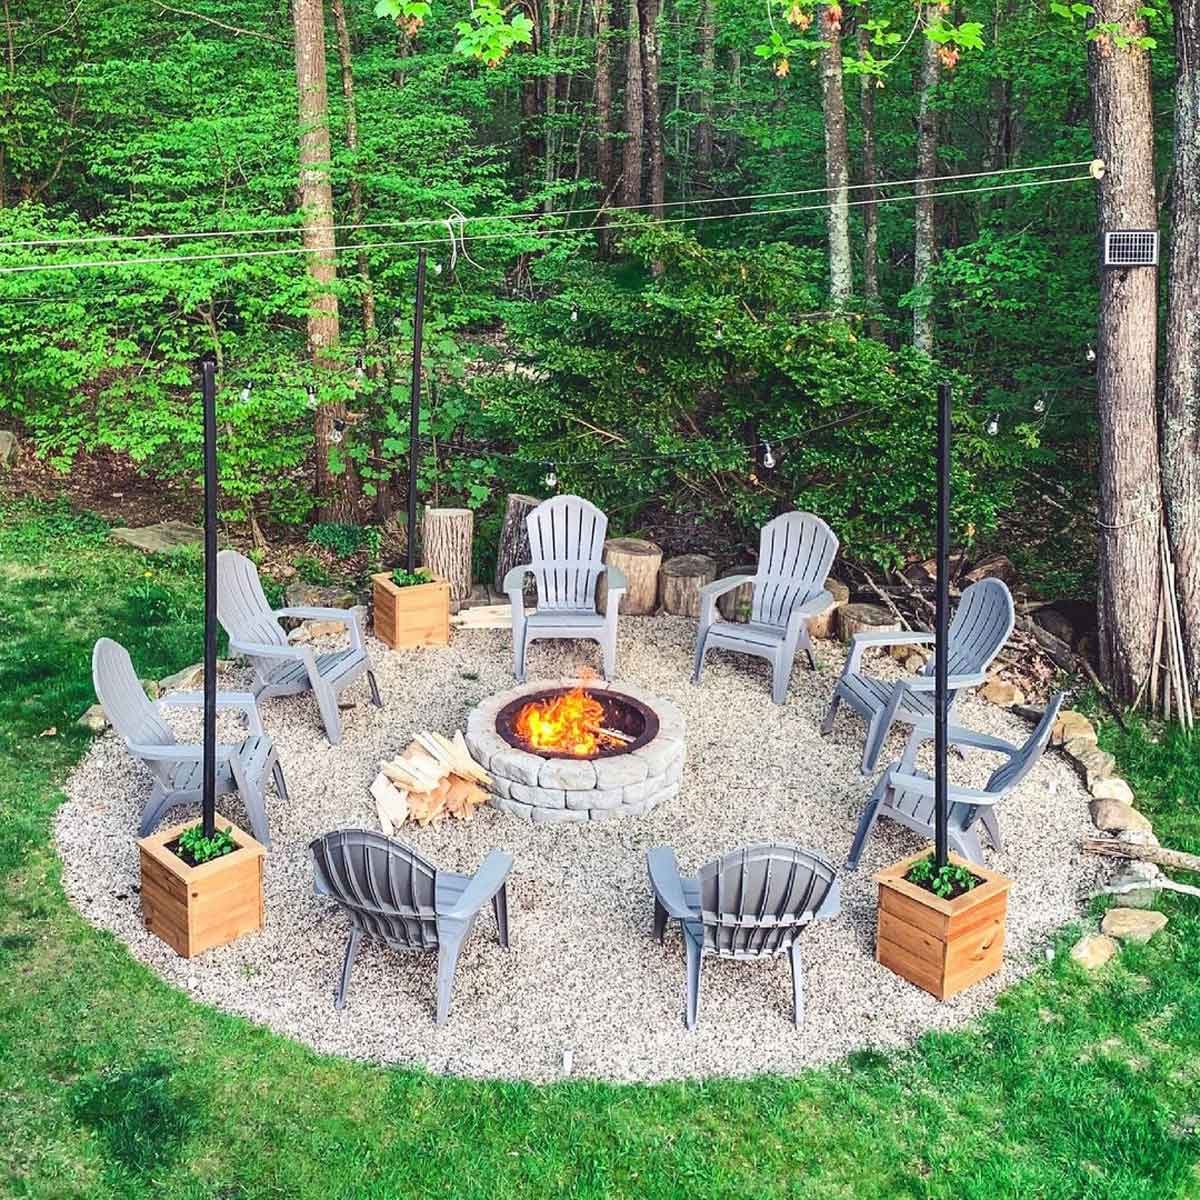 Fire Pit Seating 206241147 493399921914762 8098330328915506237 N ?resize=700